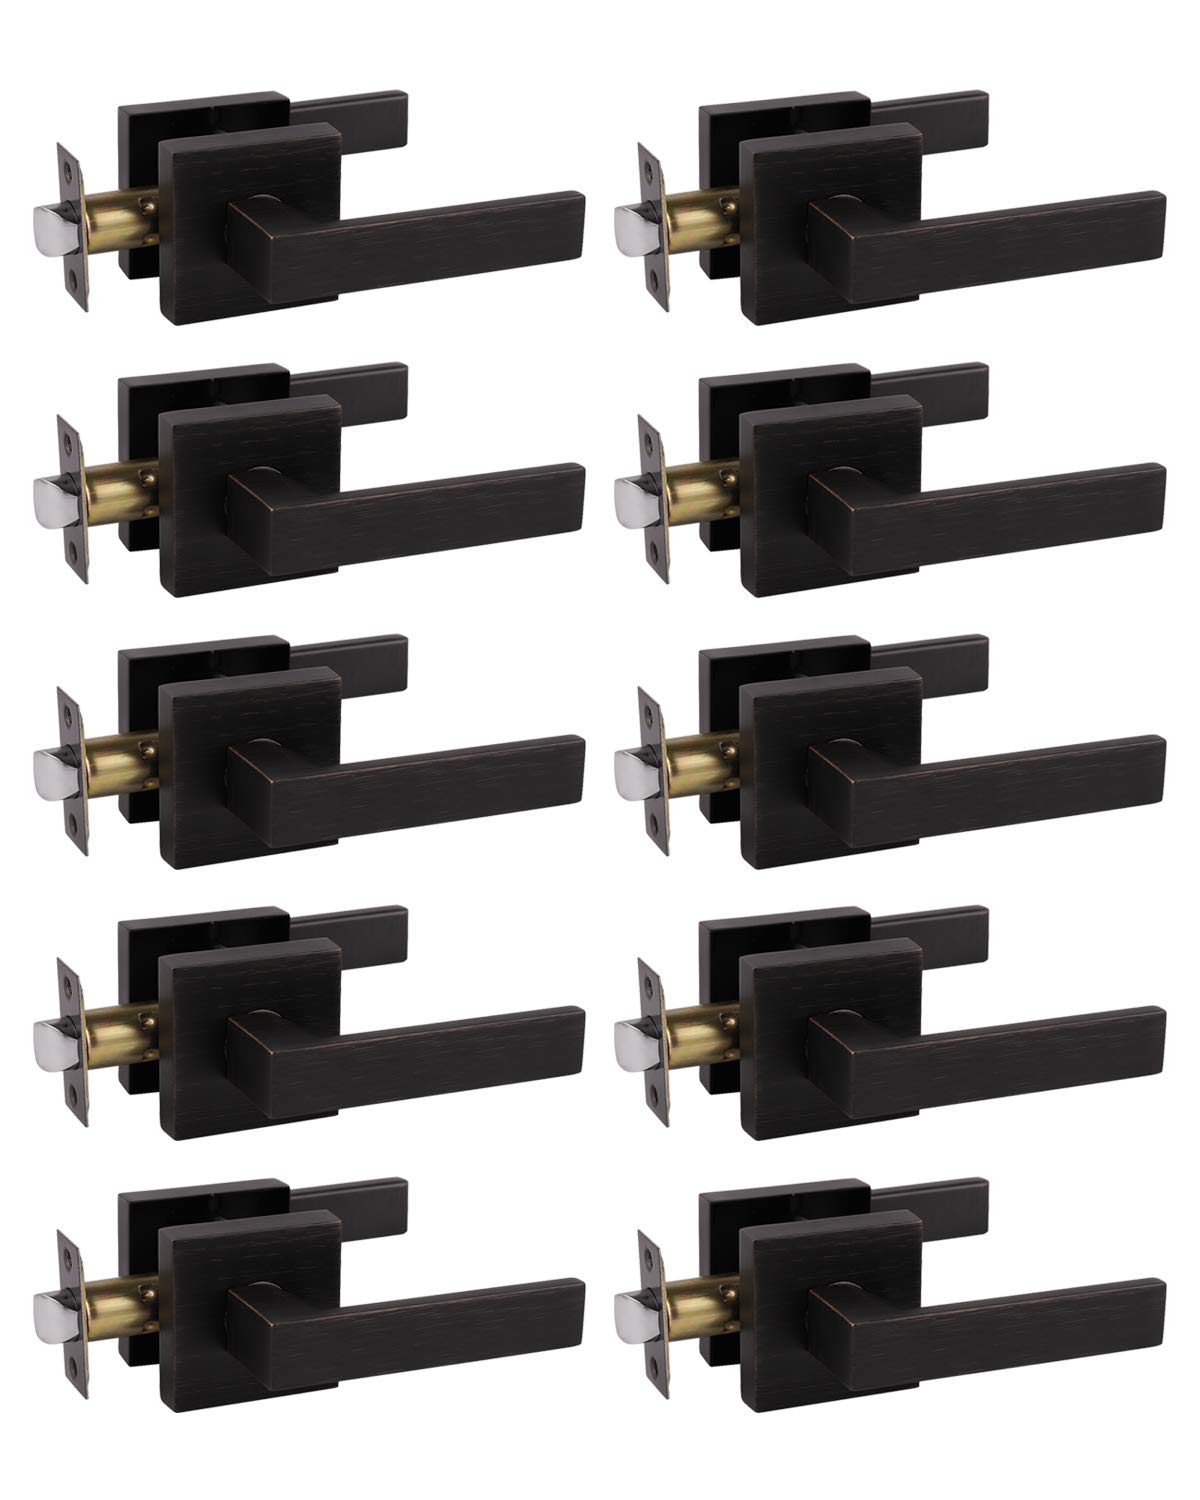 Probrico Passage Closet and Hall Door Levers Lock Oil Rubbed Bronze Finish 10 Packs - Probrico